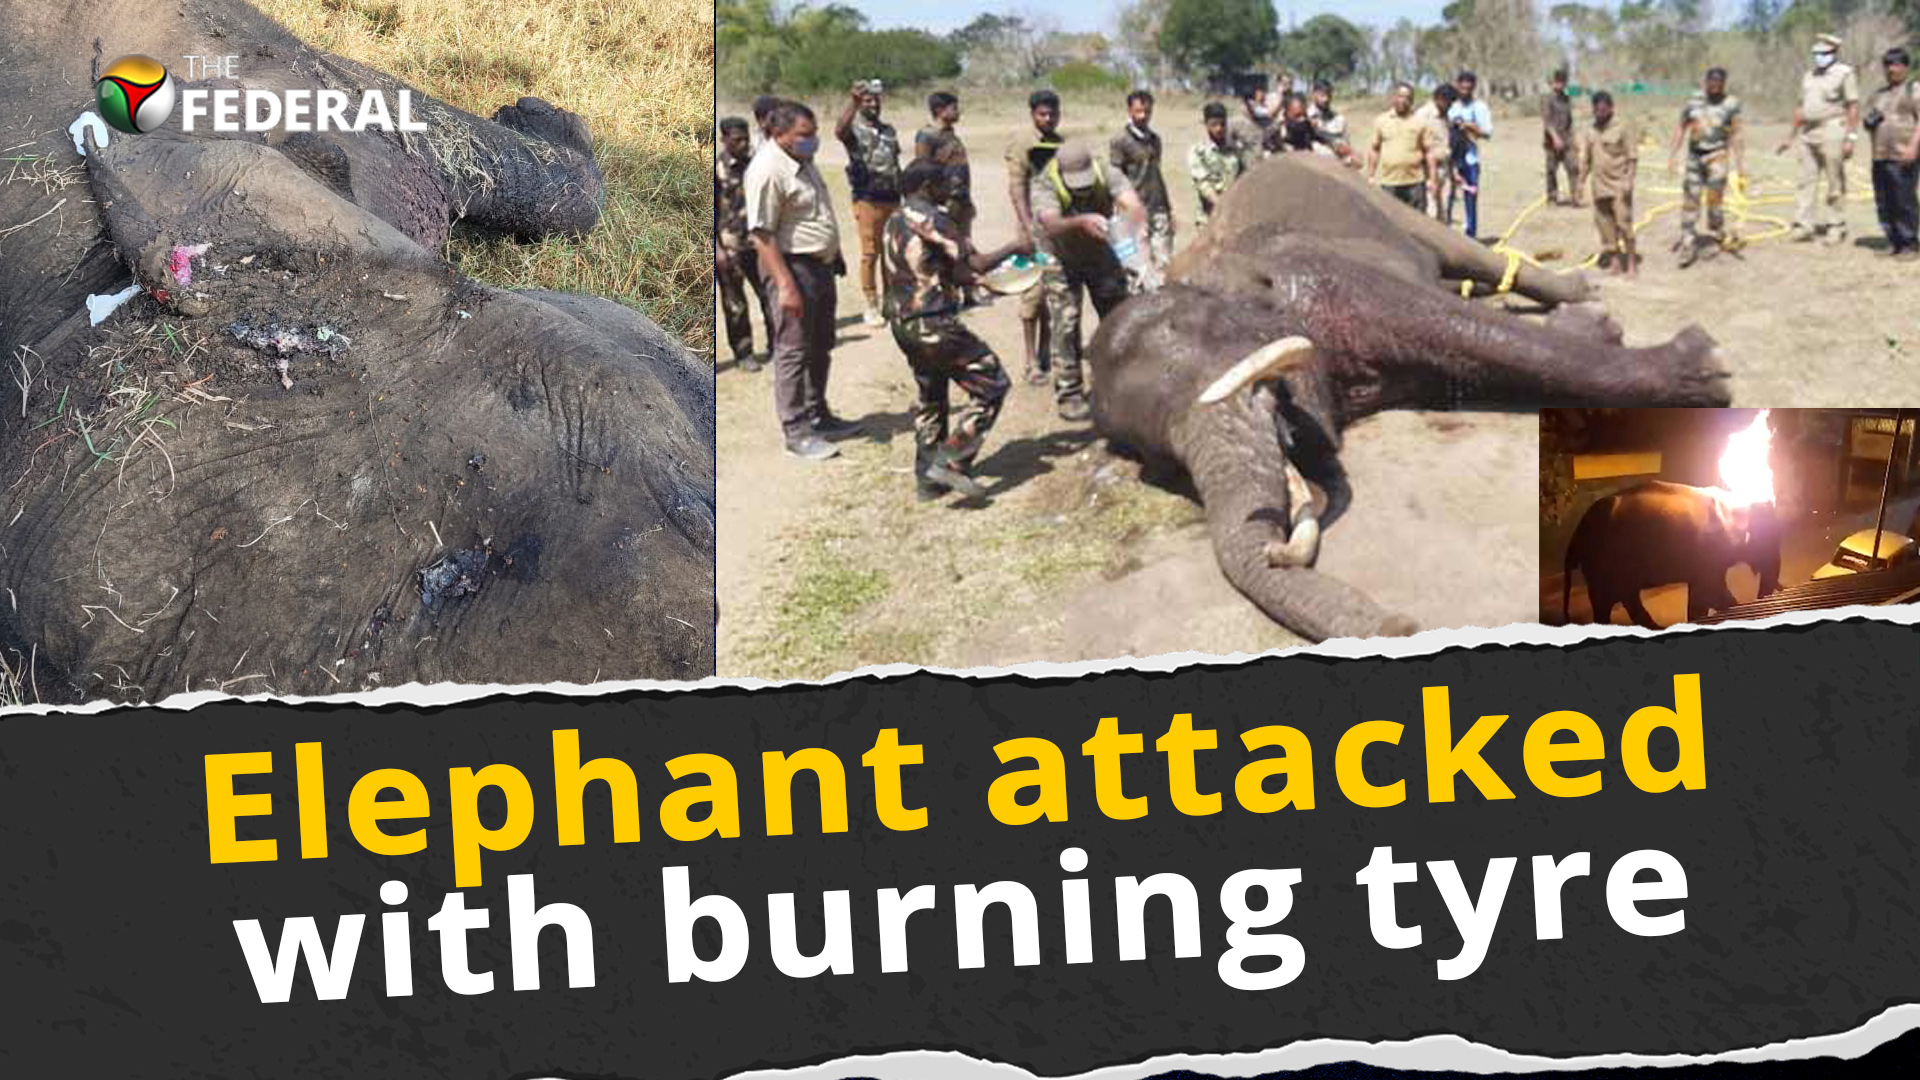 Elephant dies of deep injuries, video shows it being attacked with burning tyre